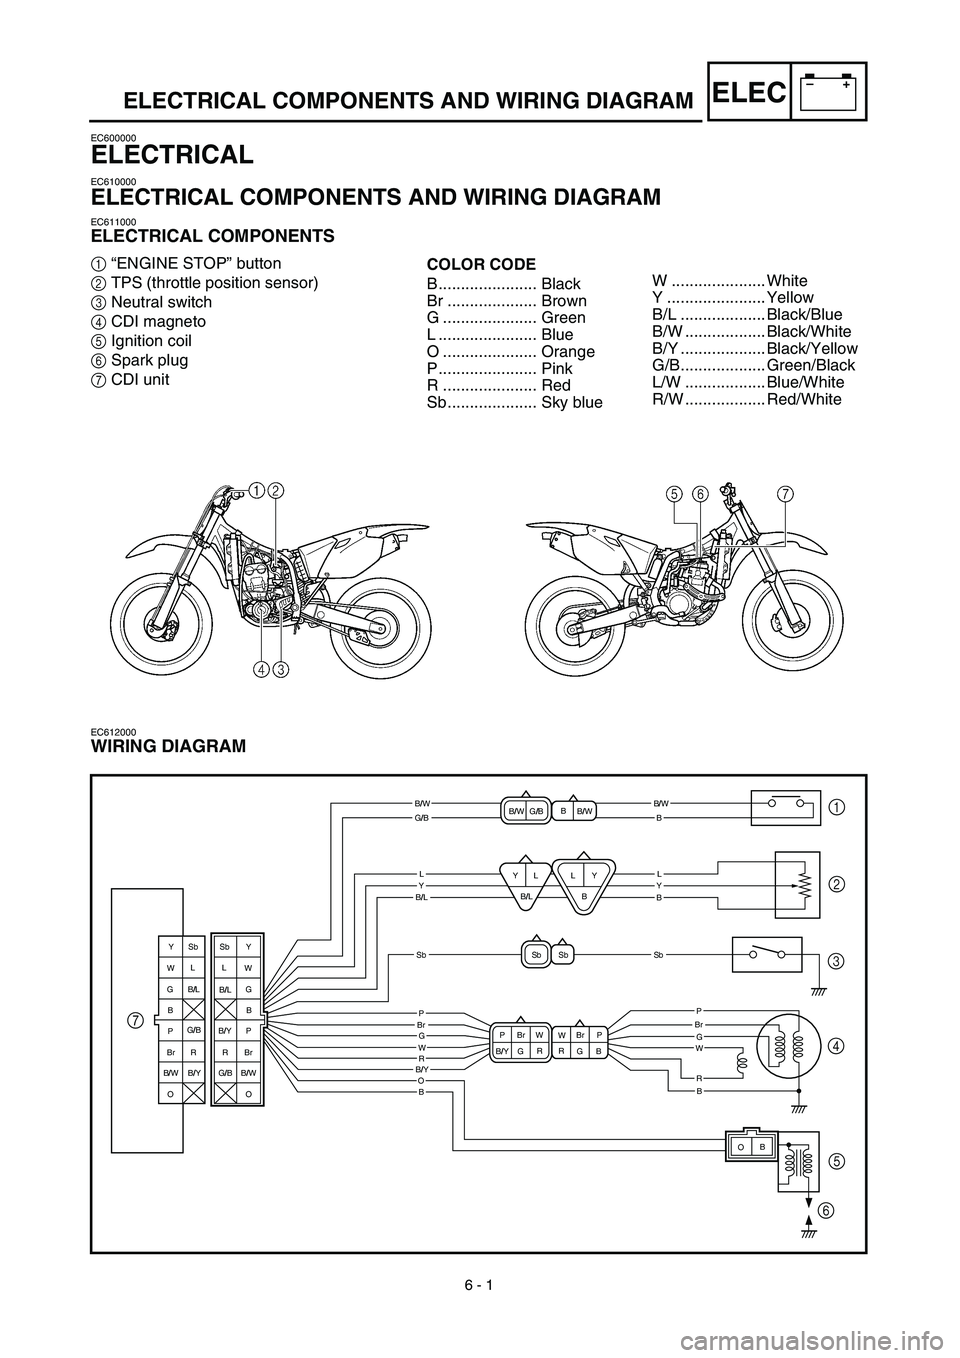 YAMAHA YZ450F 2003  Notices Demploi (in French)  
6 - 1
–+ELEC
 
ELECTRICAL COMPONENTS AND WIRING DIAGRAM 
EC600000 
ELECTRICAL 
EC610000 
ELECTRICAL COMPONENTS AND WIRING DIAGRAM 
EC611000 
ELECTRICAL COMPONENTS 
1  
“ENGINE STOP” button  
2